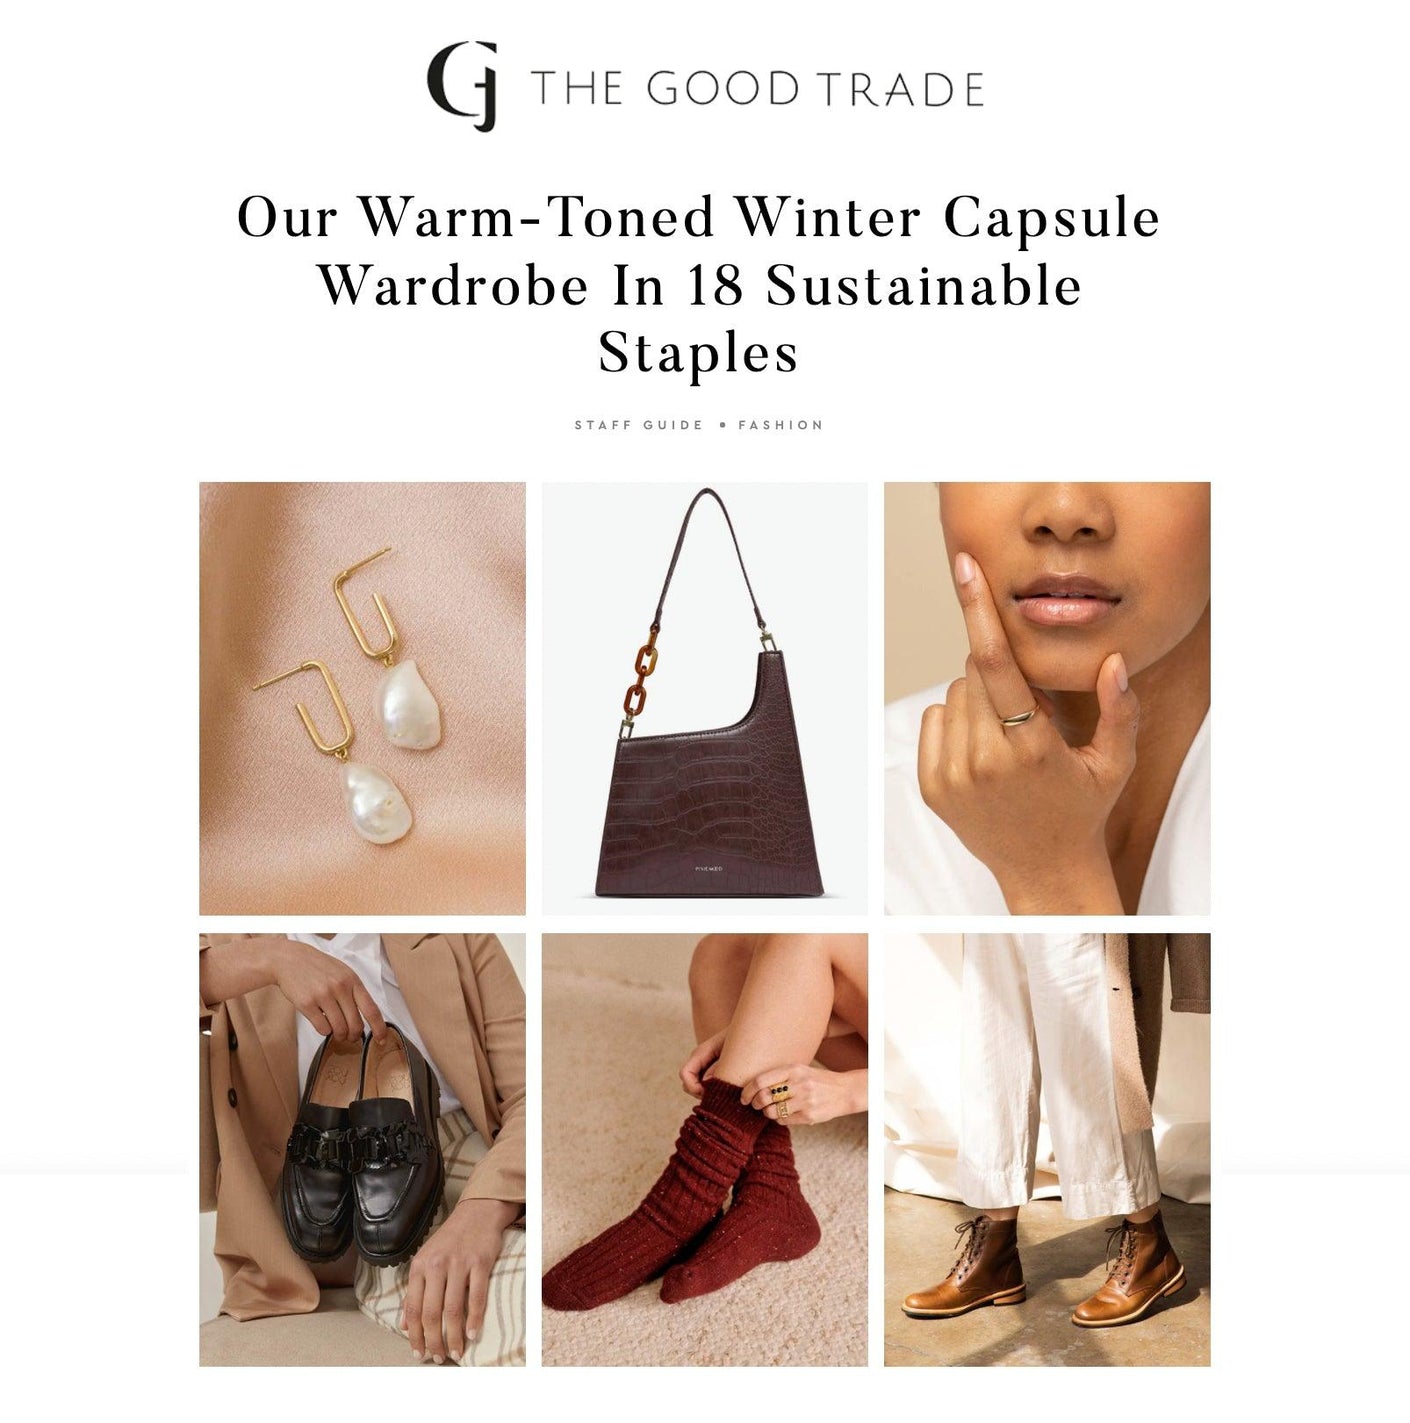 The Good Trade: Our Warm-Toned Winter Capsule Wardrobe In 18 Sustainable Staples - Pixie Mood Vegan Leather Bags